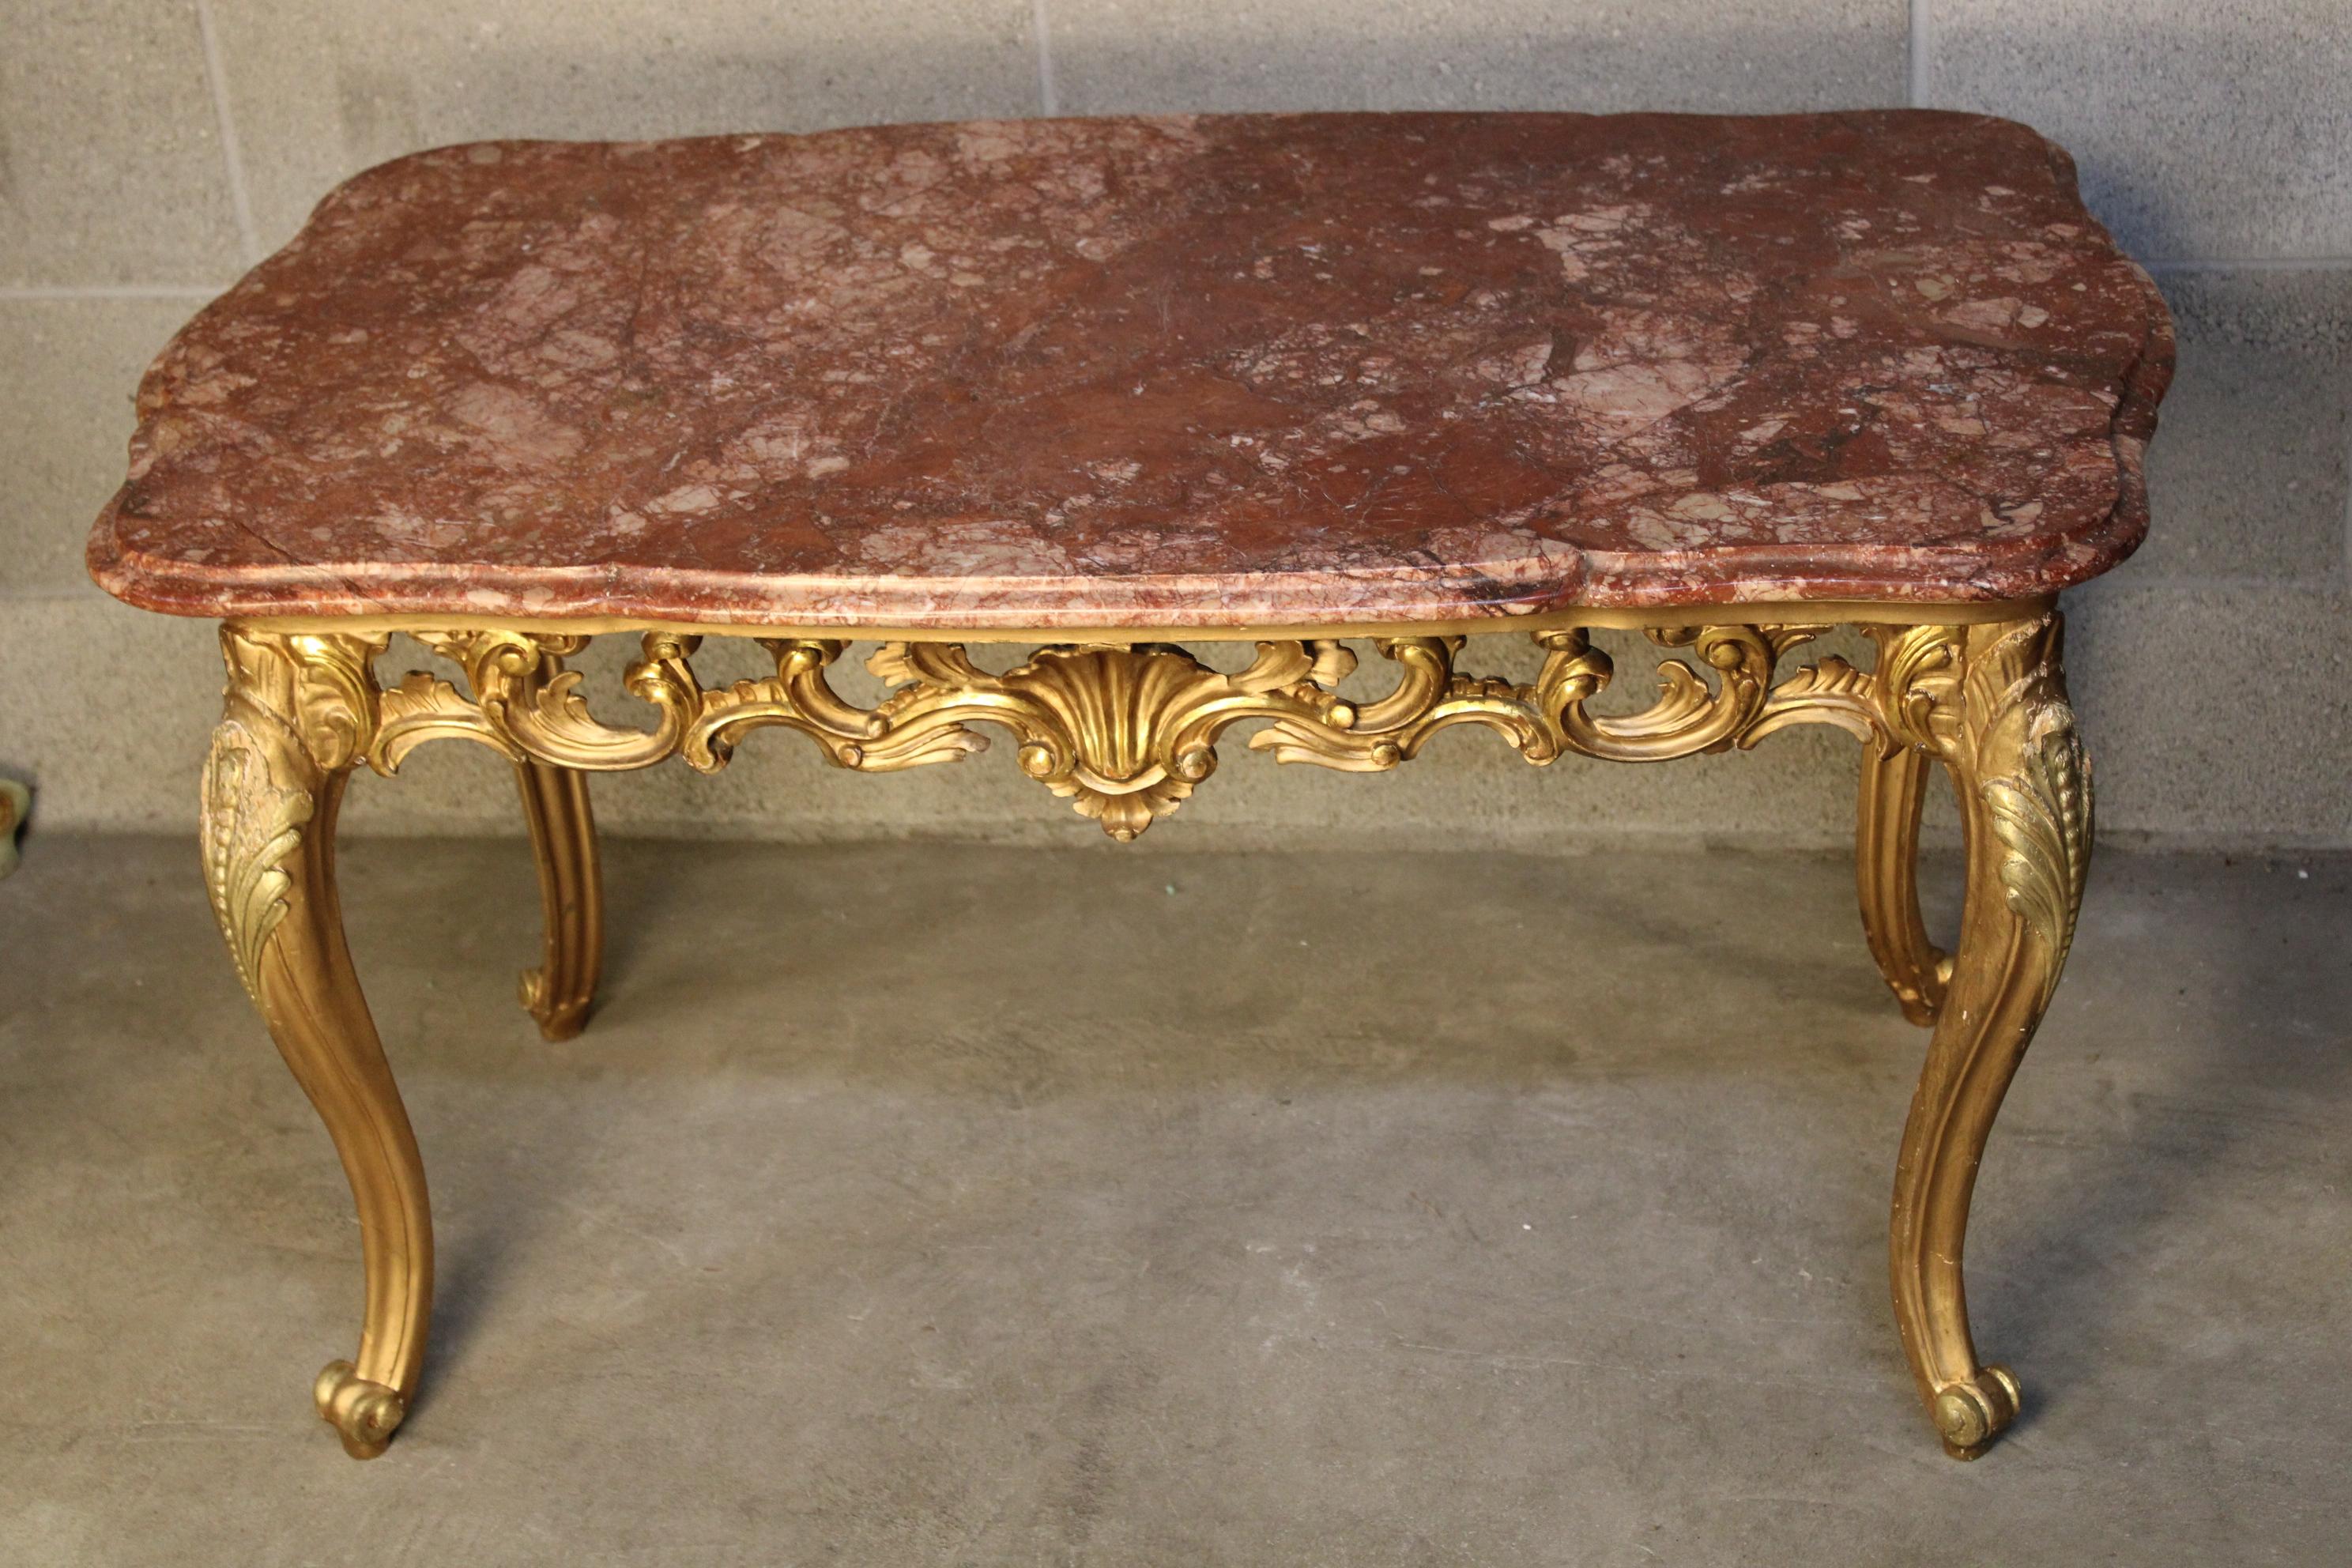 A Louis XV style hand carved giltwood sofa table with italian marble
beautiful item in good condition 
Early XX. century about 1920-1930 
will be shipped inside a secured wood box.
 